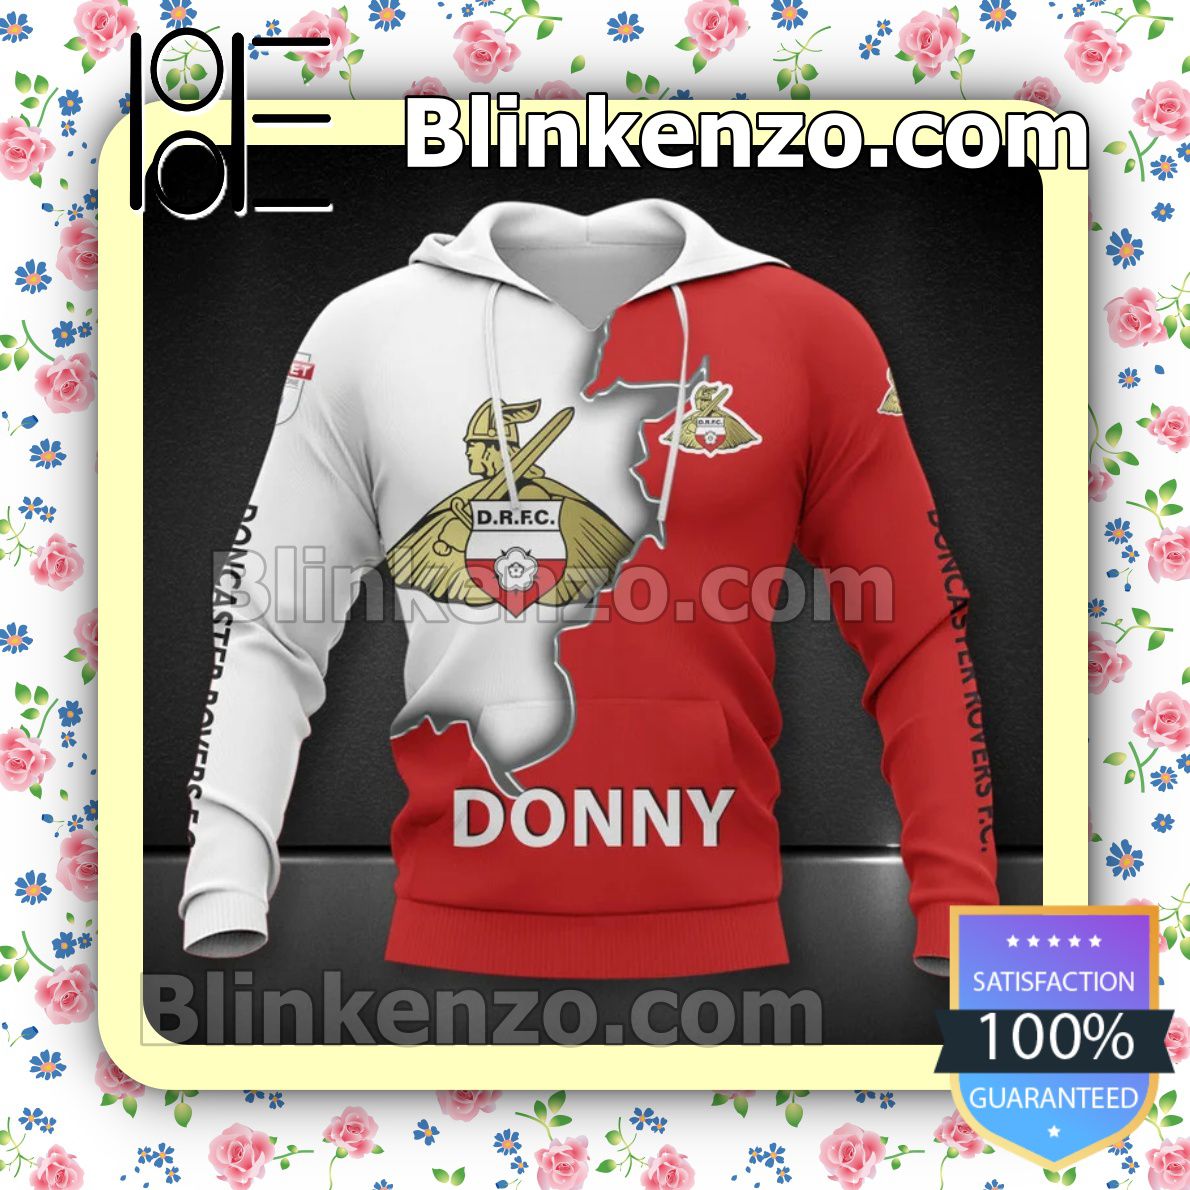 Near you Doncaster Rovers FC Donny Men T-shirt, Hooded Sweatshirt